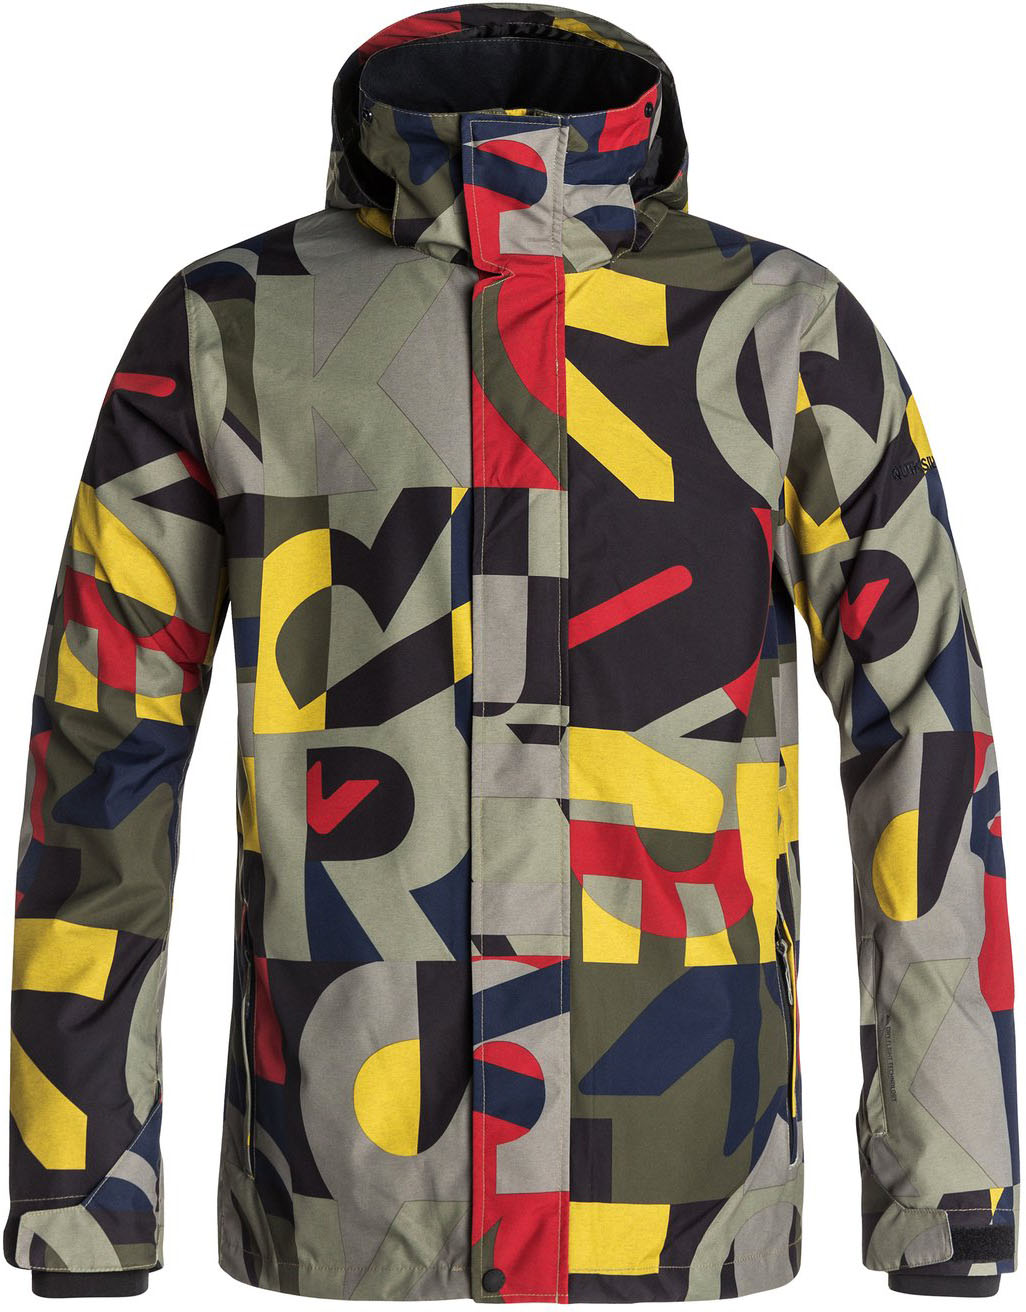 Expertise Archeoloog revolutie Quiksilver Mission Print Snowboard Jacket Review - The Good Ride